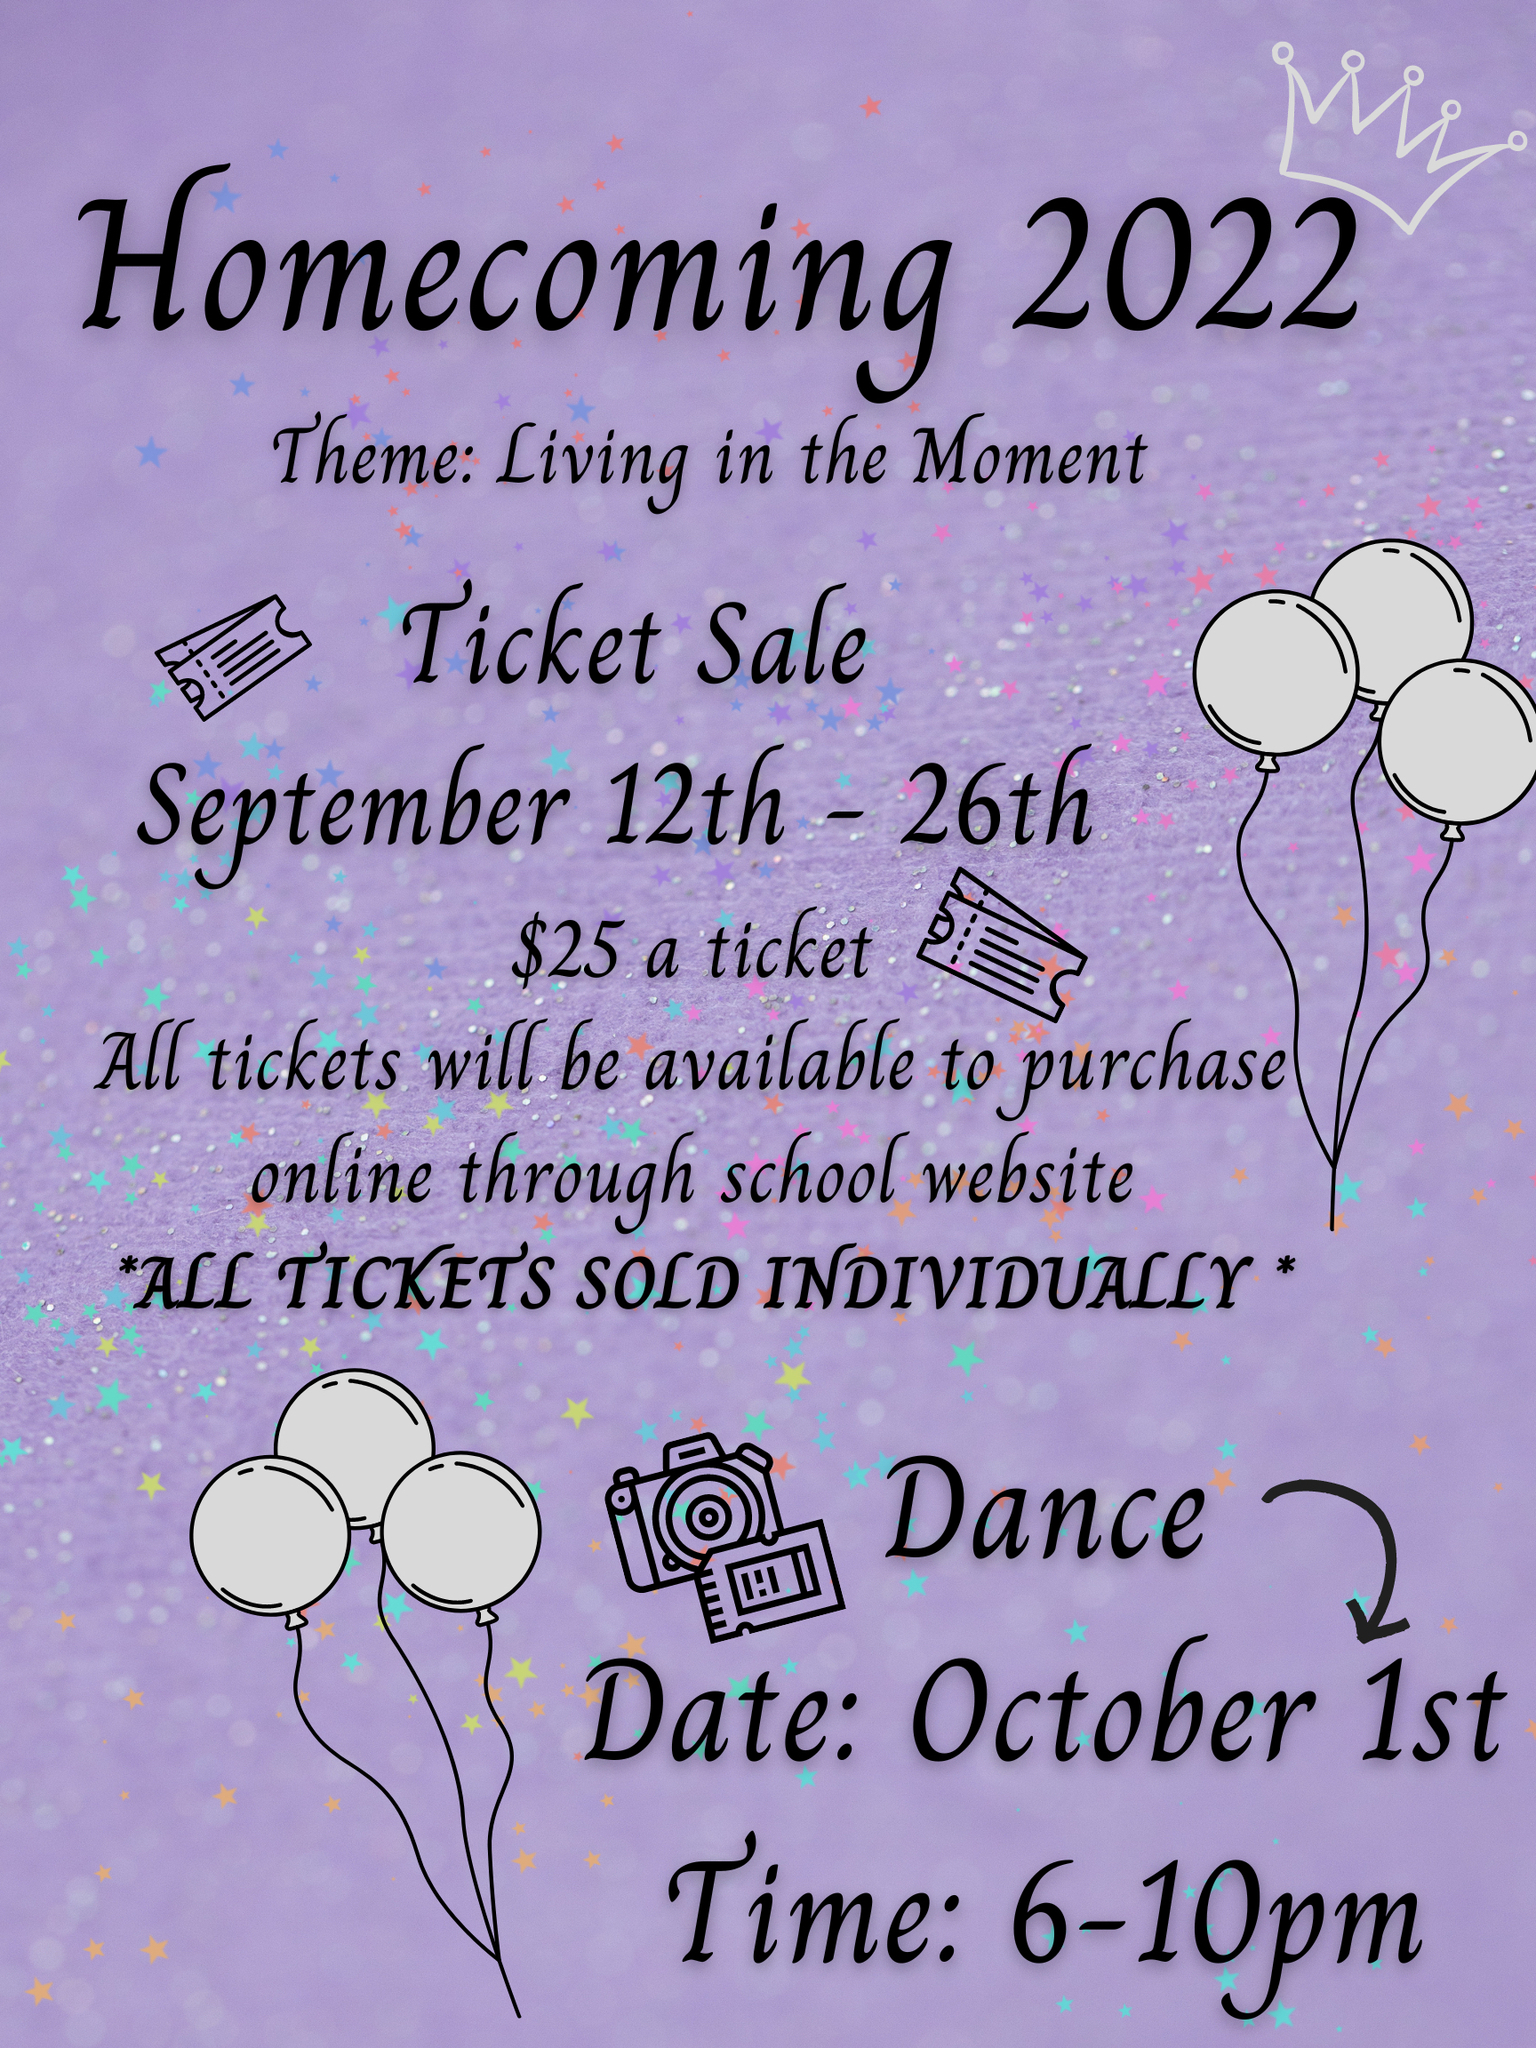 Homecoming flyer - all text is a repeat of the above typed text